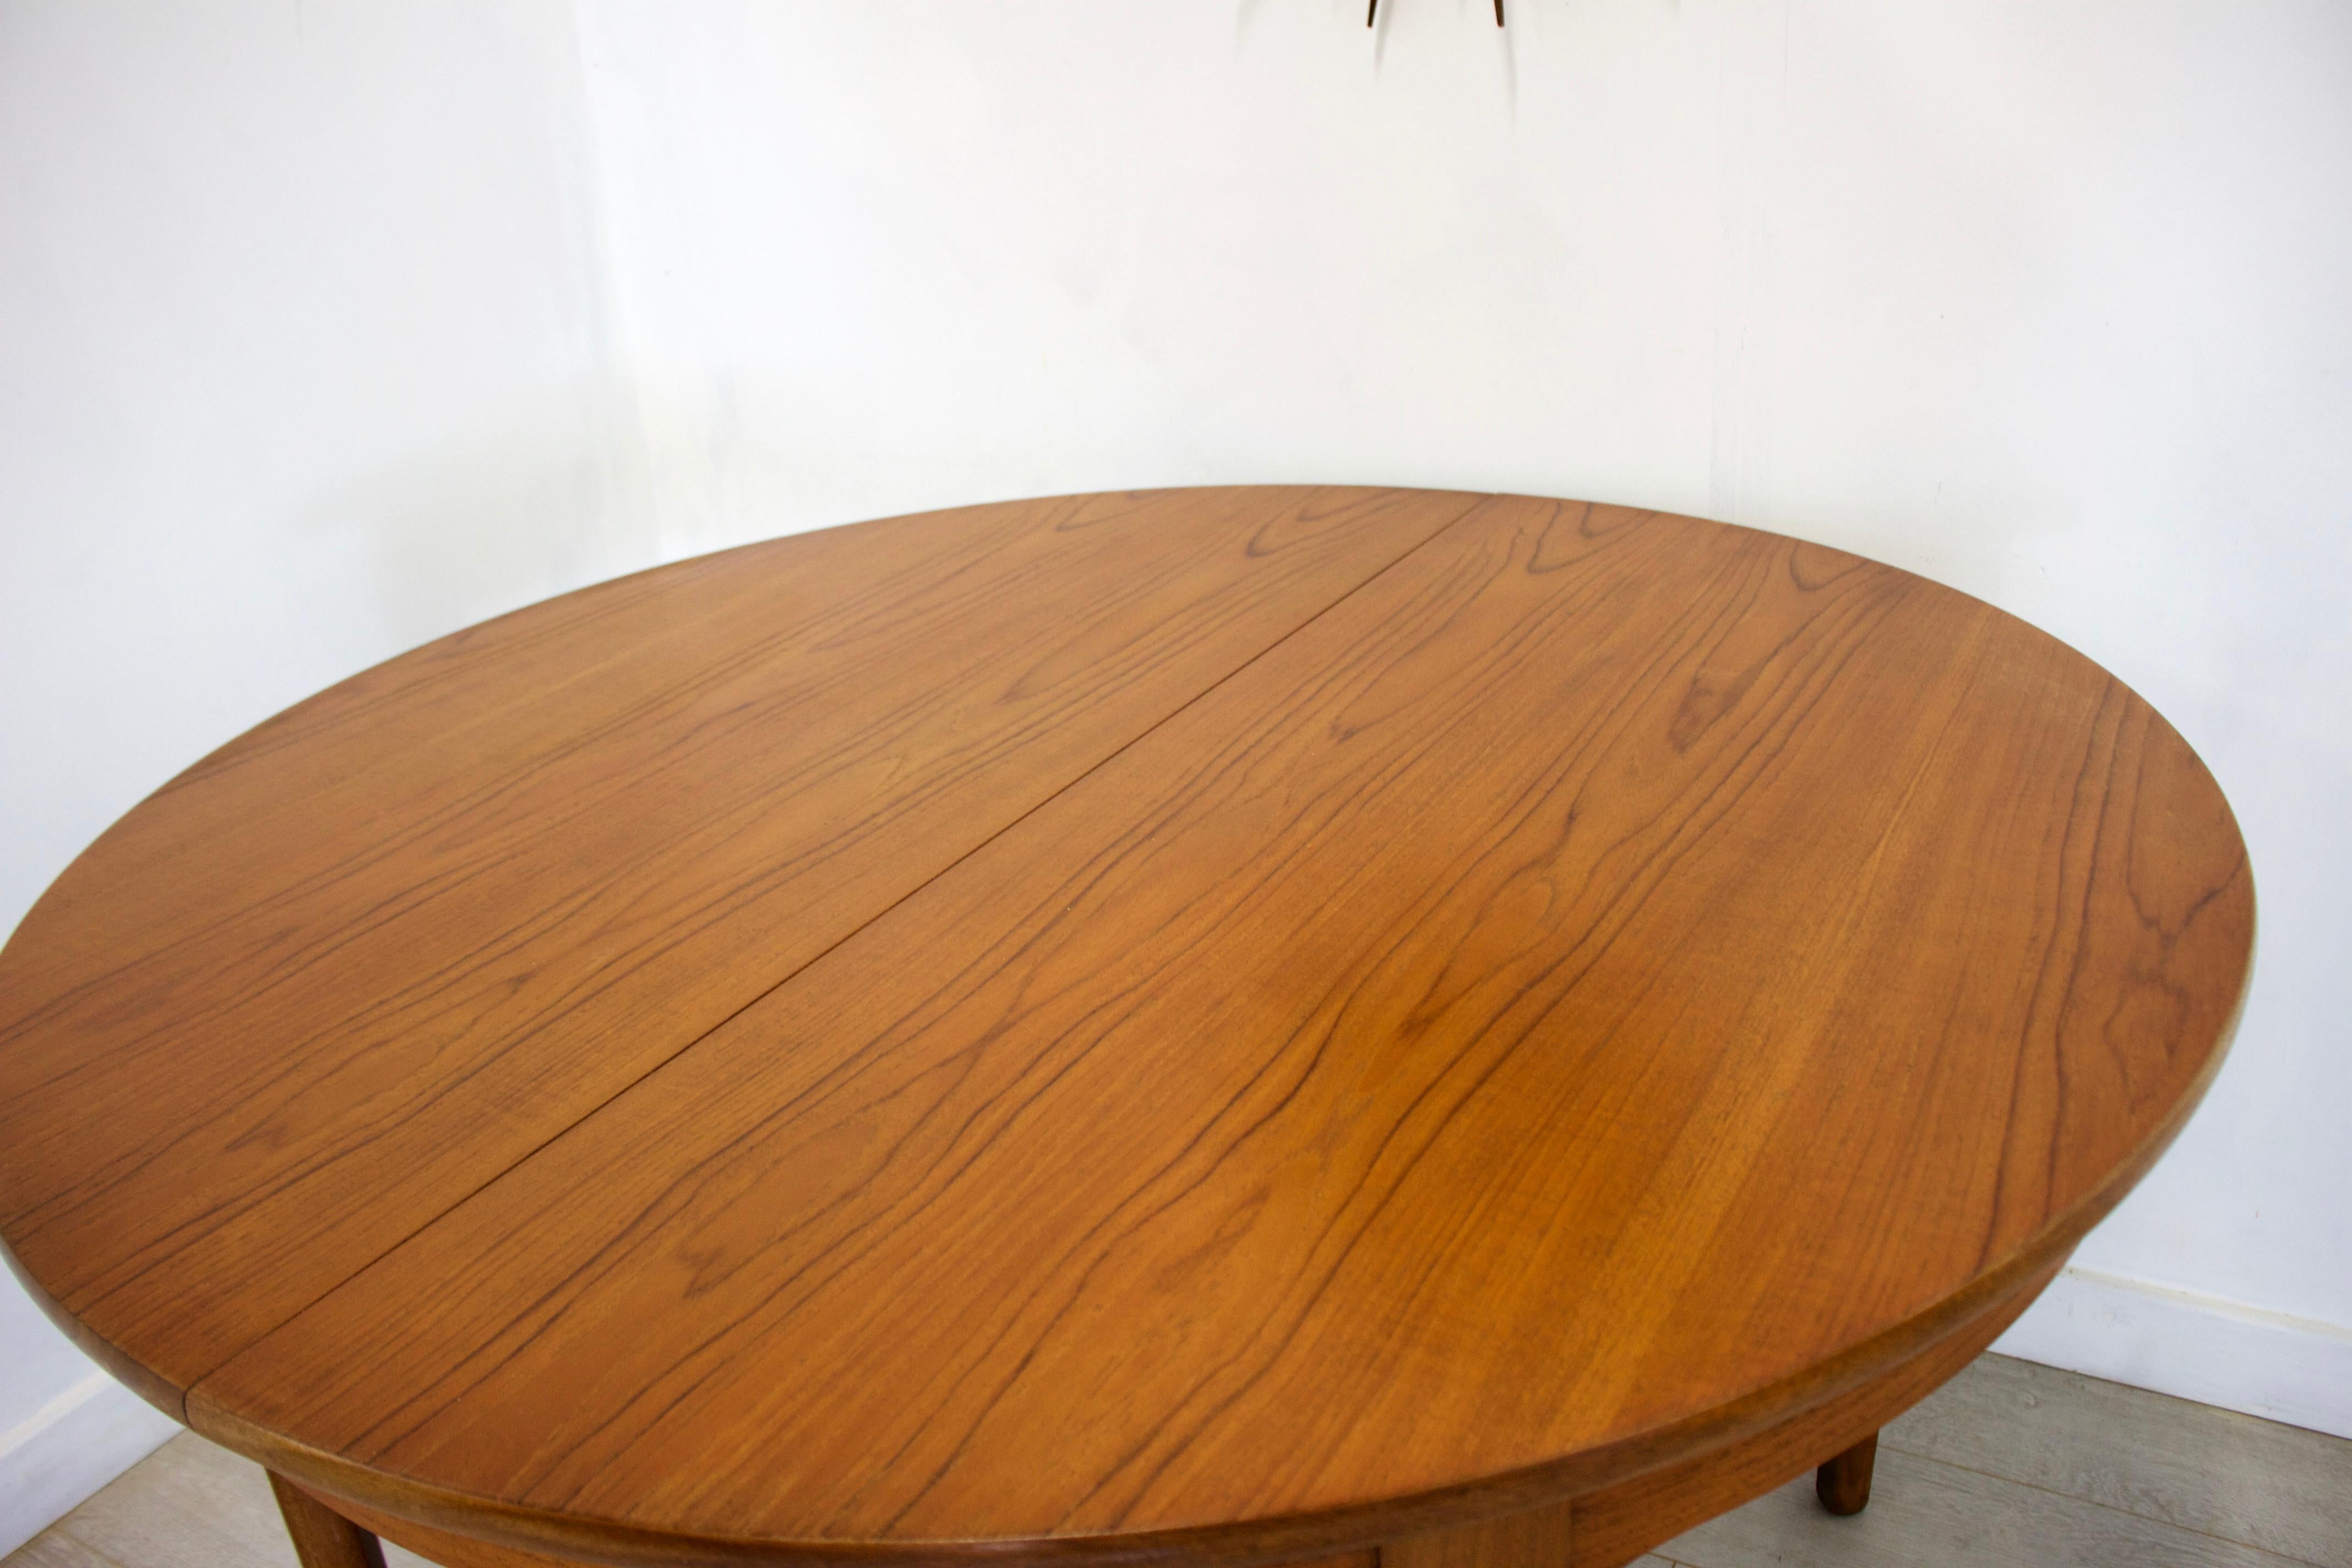 British Midcentury Teak Round Extendable Dining Table from Nathan, 1960s